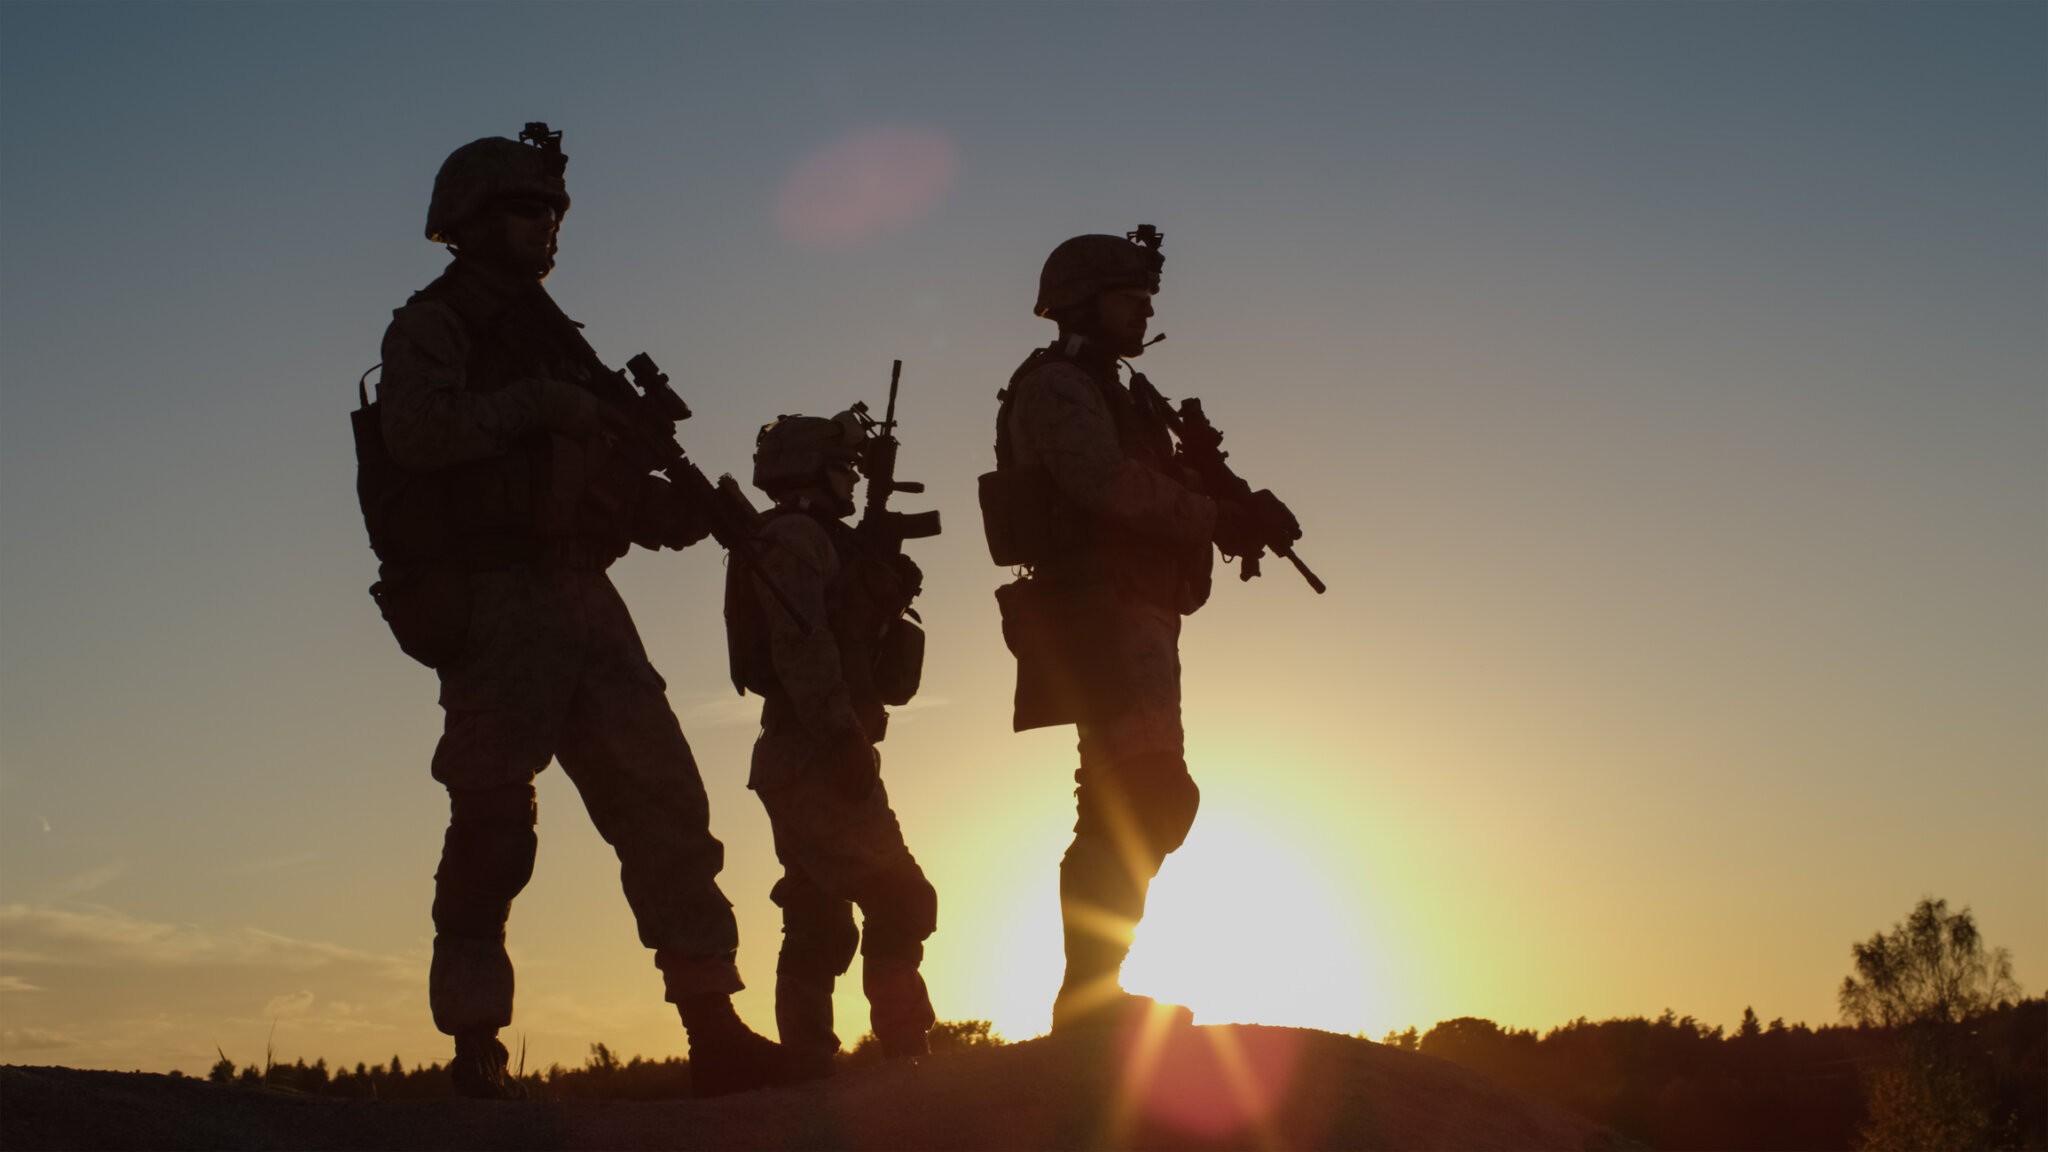 Squad of Three Fully Equipped and Armed Soldiers Standing on Hill in Desert Environment in Sunset Light. War